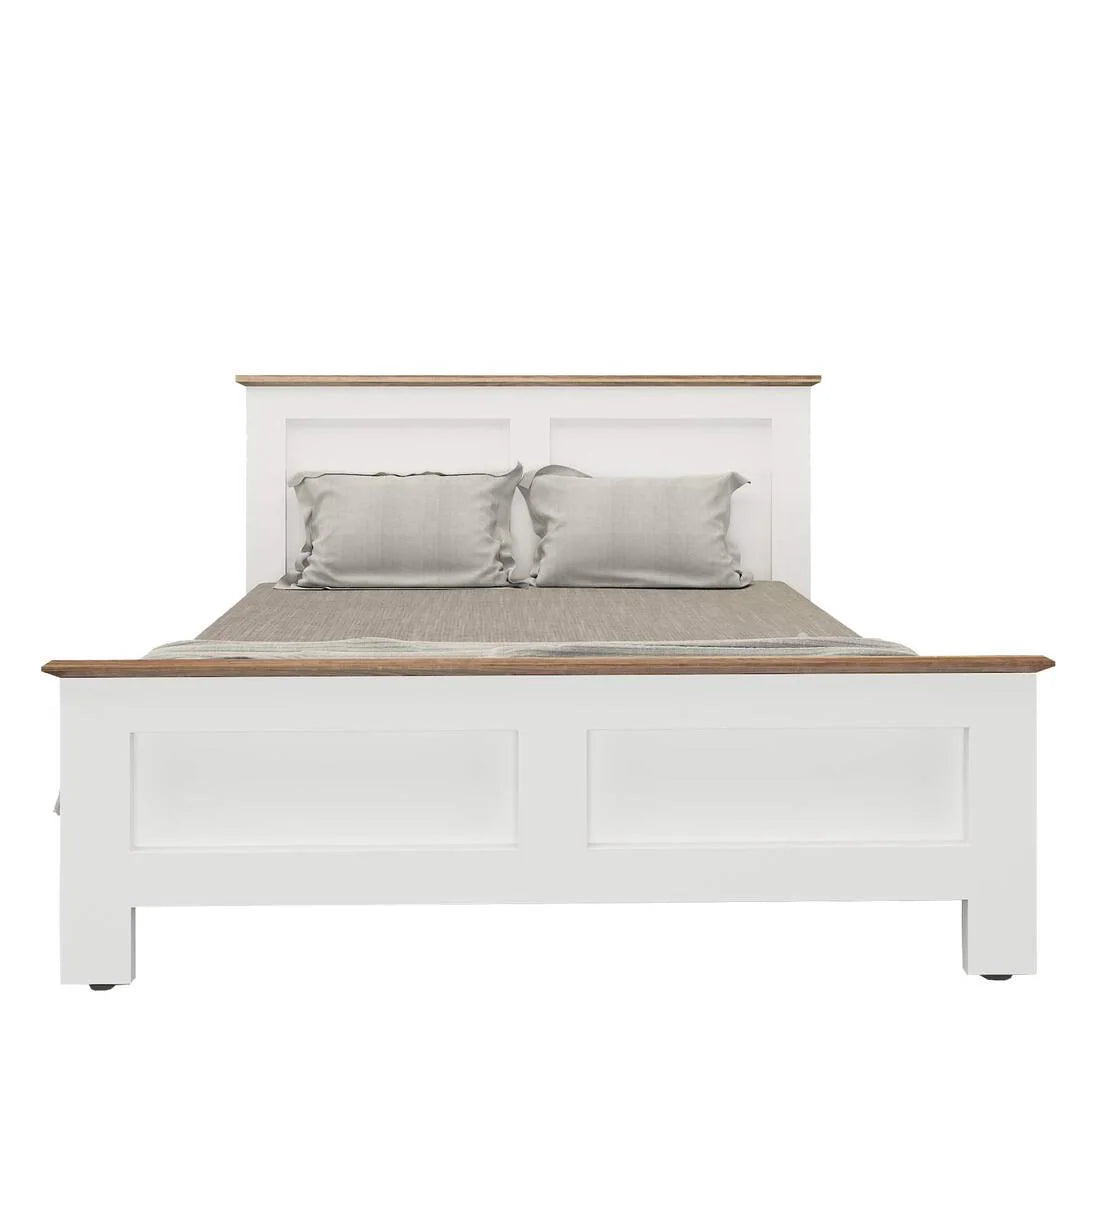 Colen King Size Bed in Mist White Finish